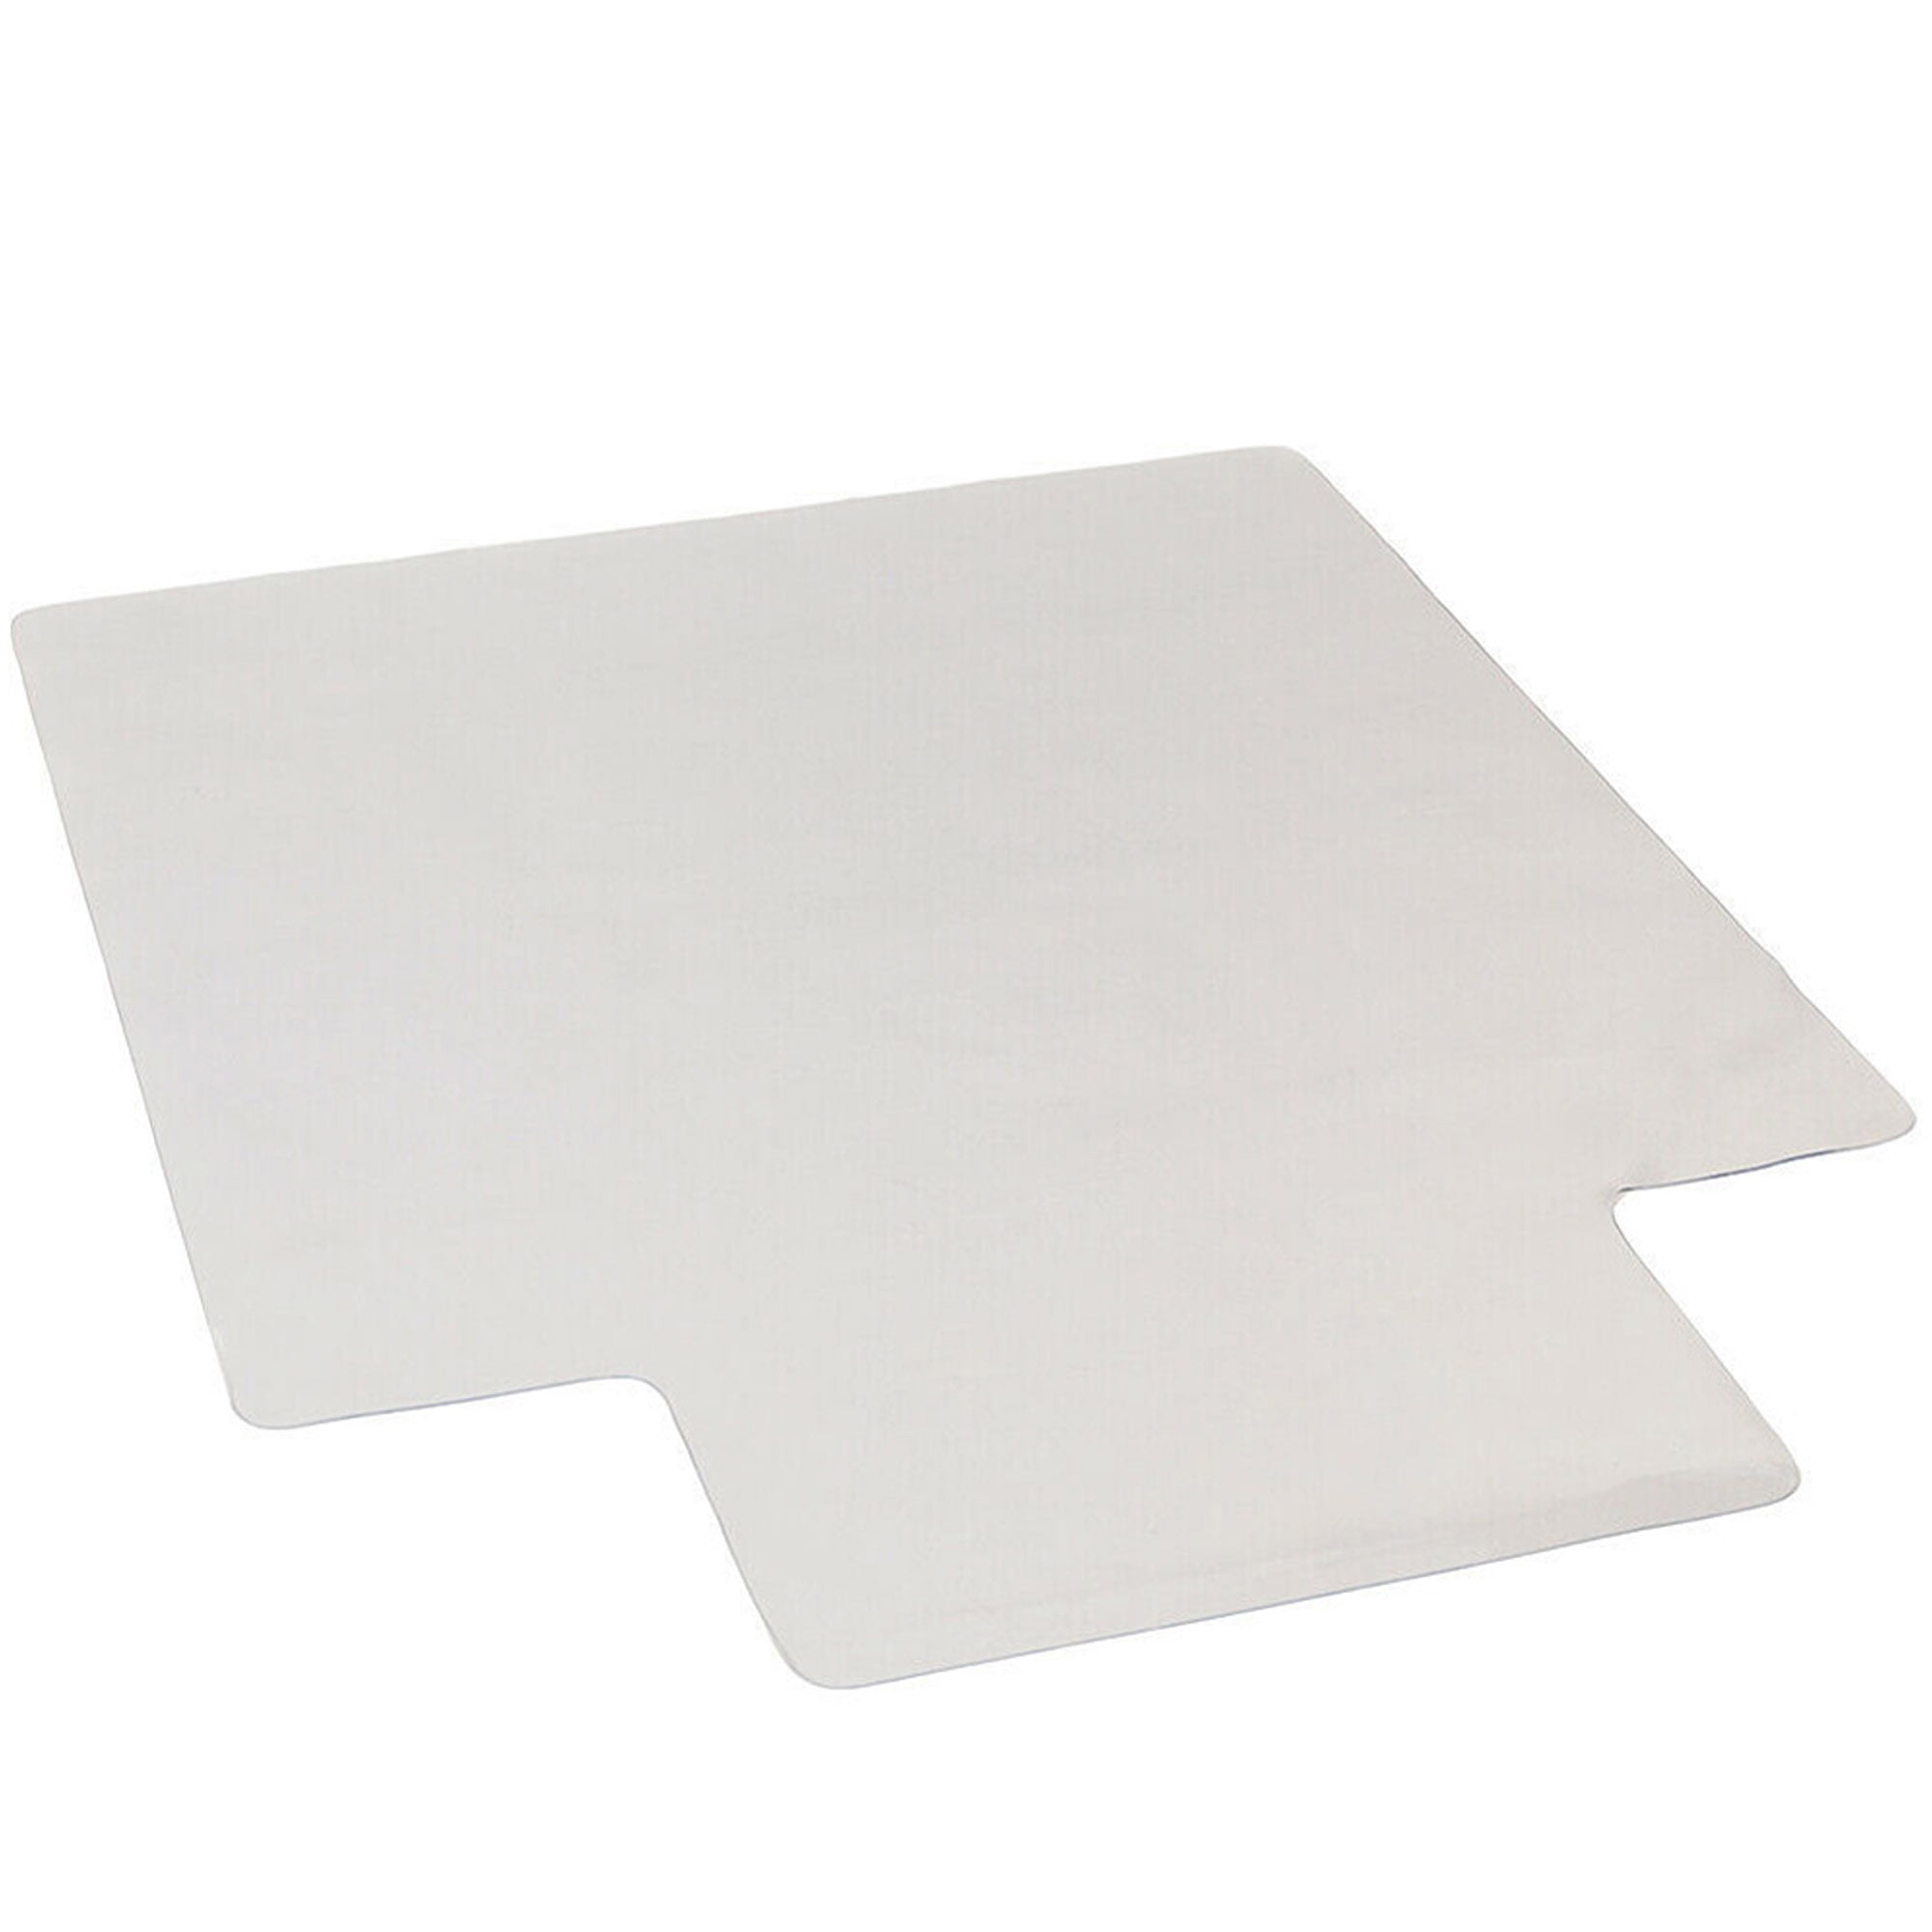 150x115cm Office Carpet Protector Chair Mat Spike Non Slip Frosted PVC Clear IB 